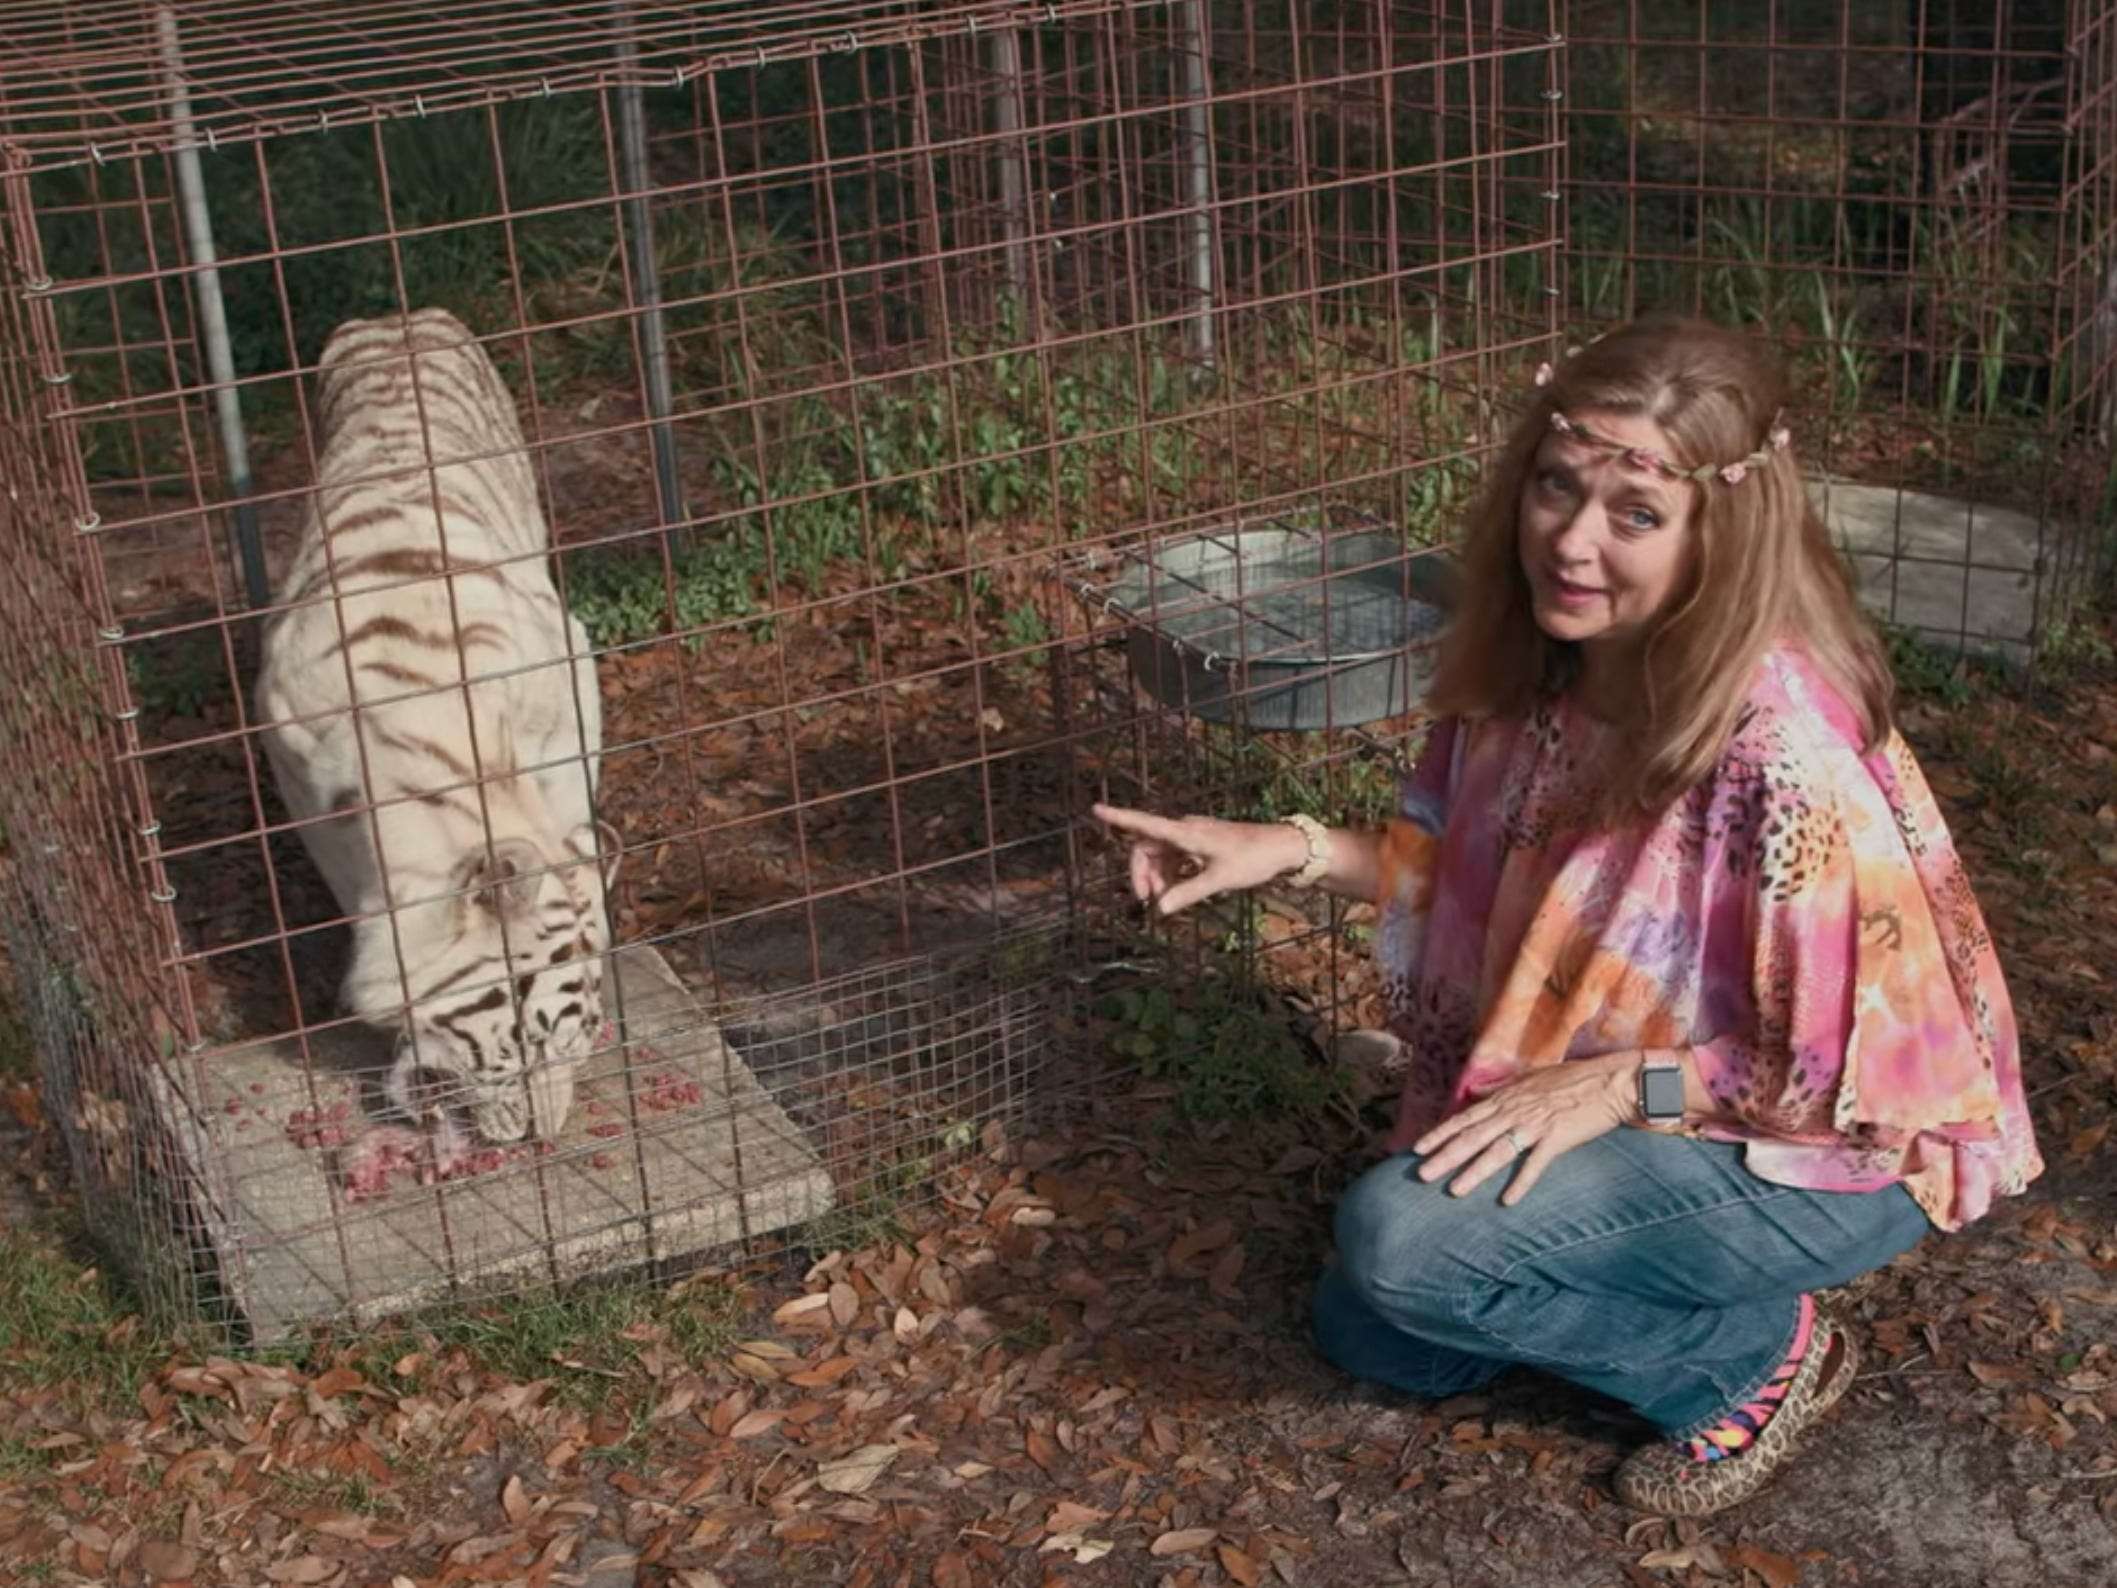 Carole Baskin says she's not sure if Big Cat Rescue will open to the